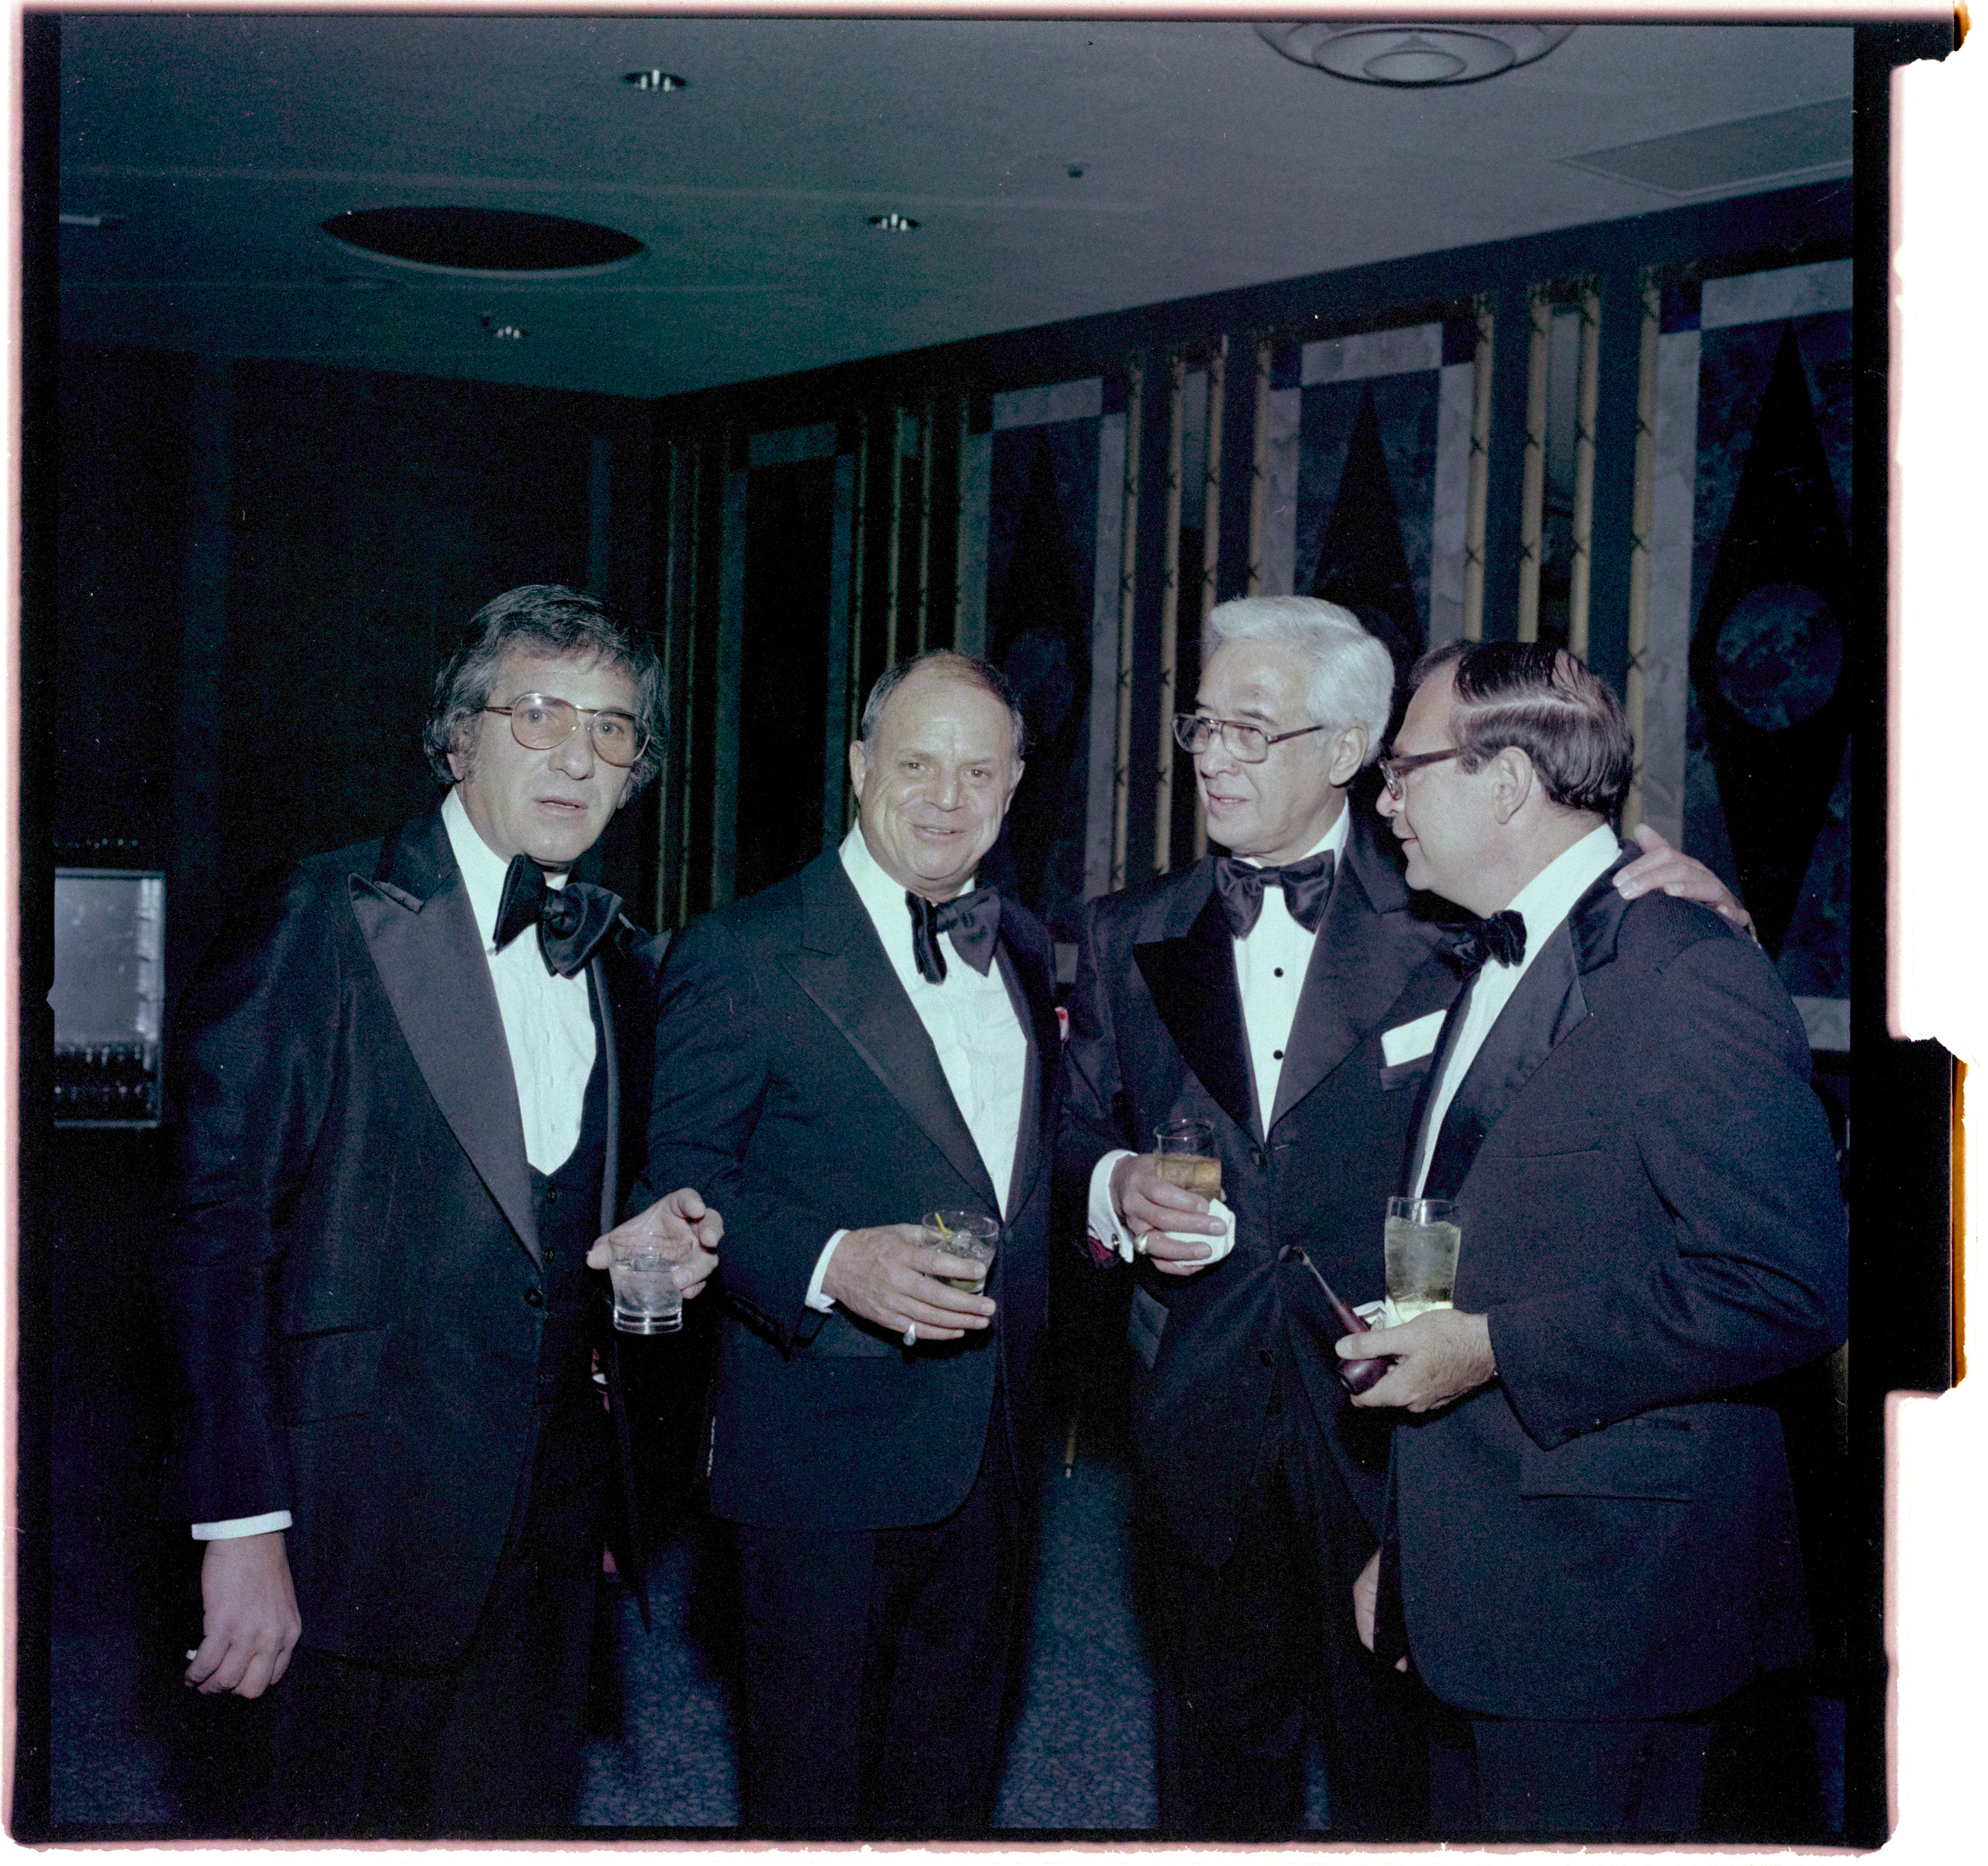 Photographs of Combined Jewish Appeal (Israel Bonds Dinner), image 09